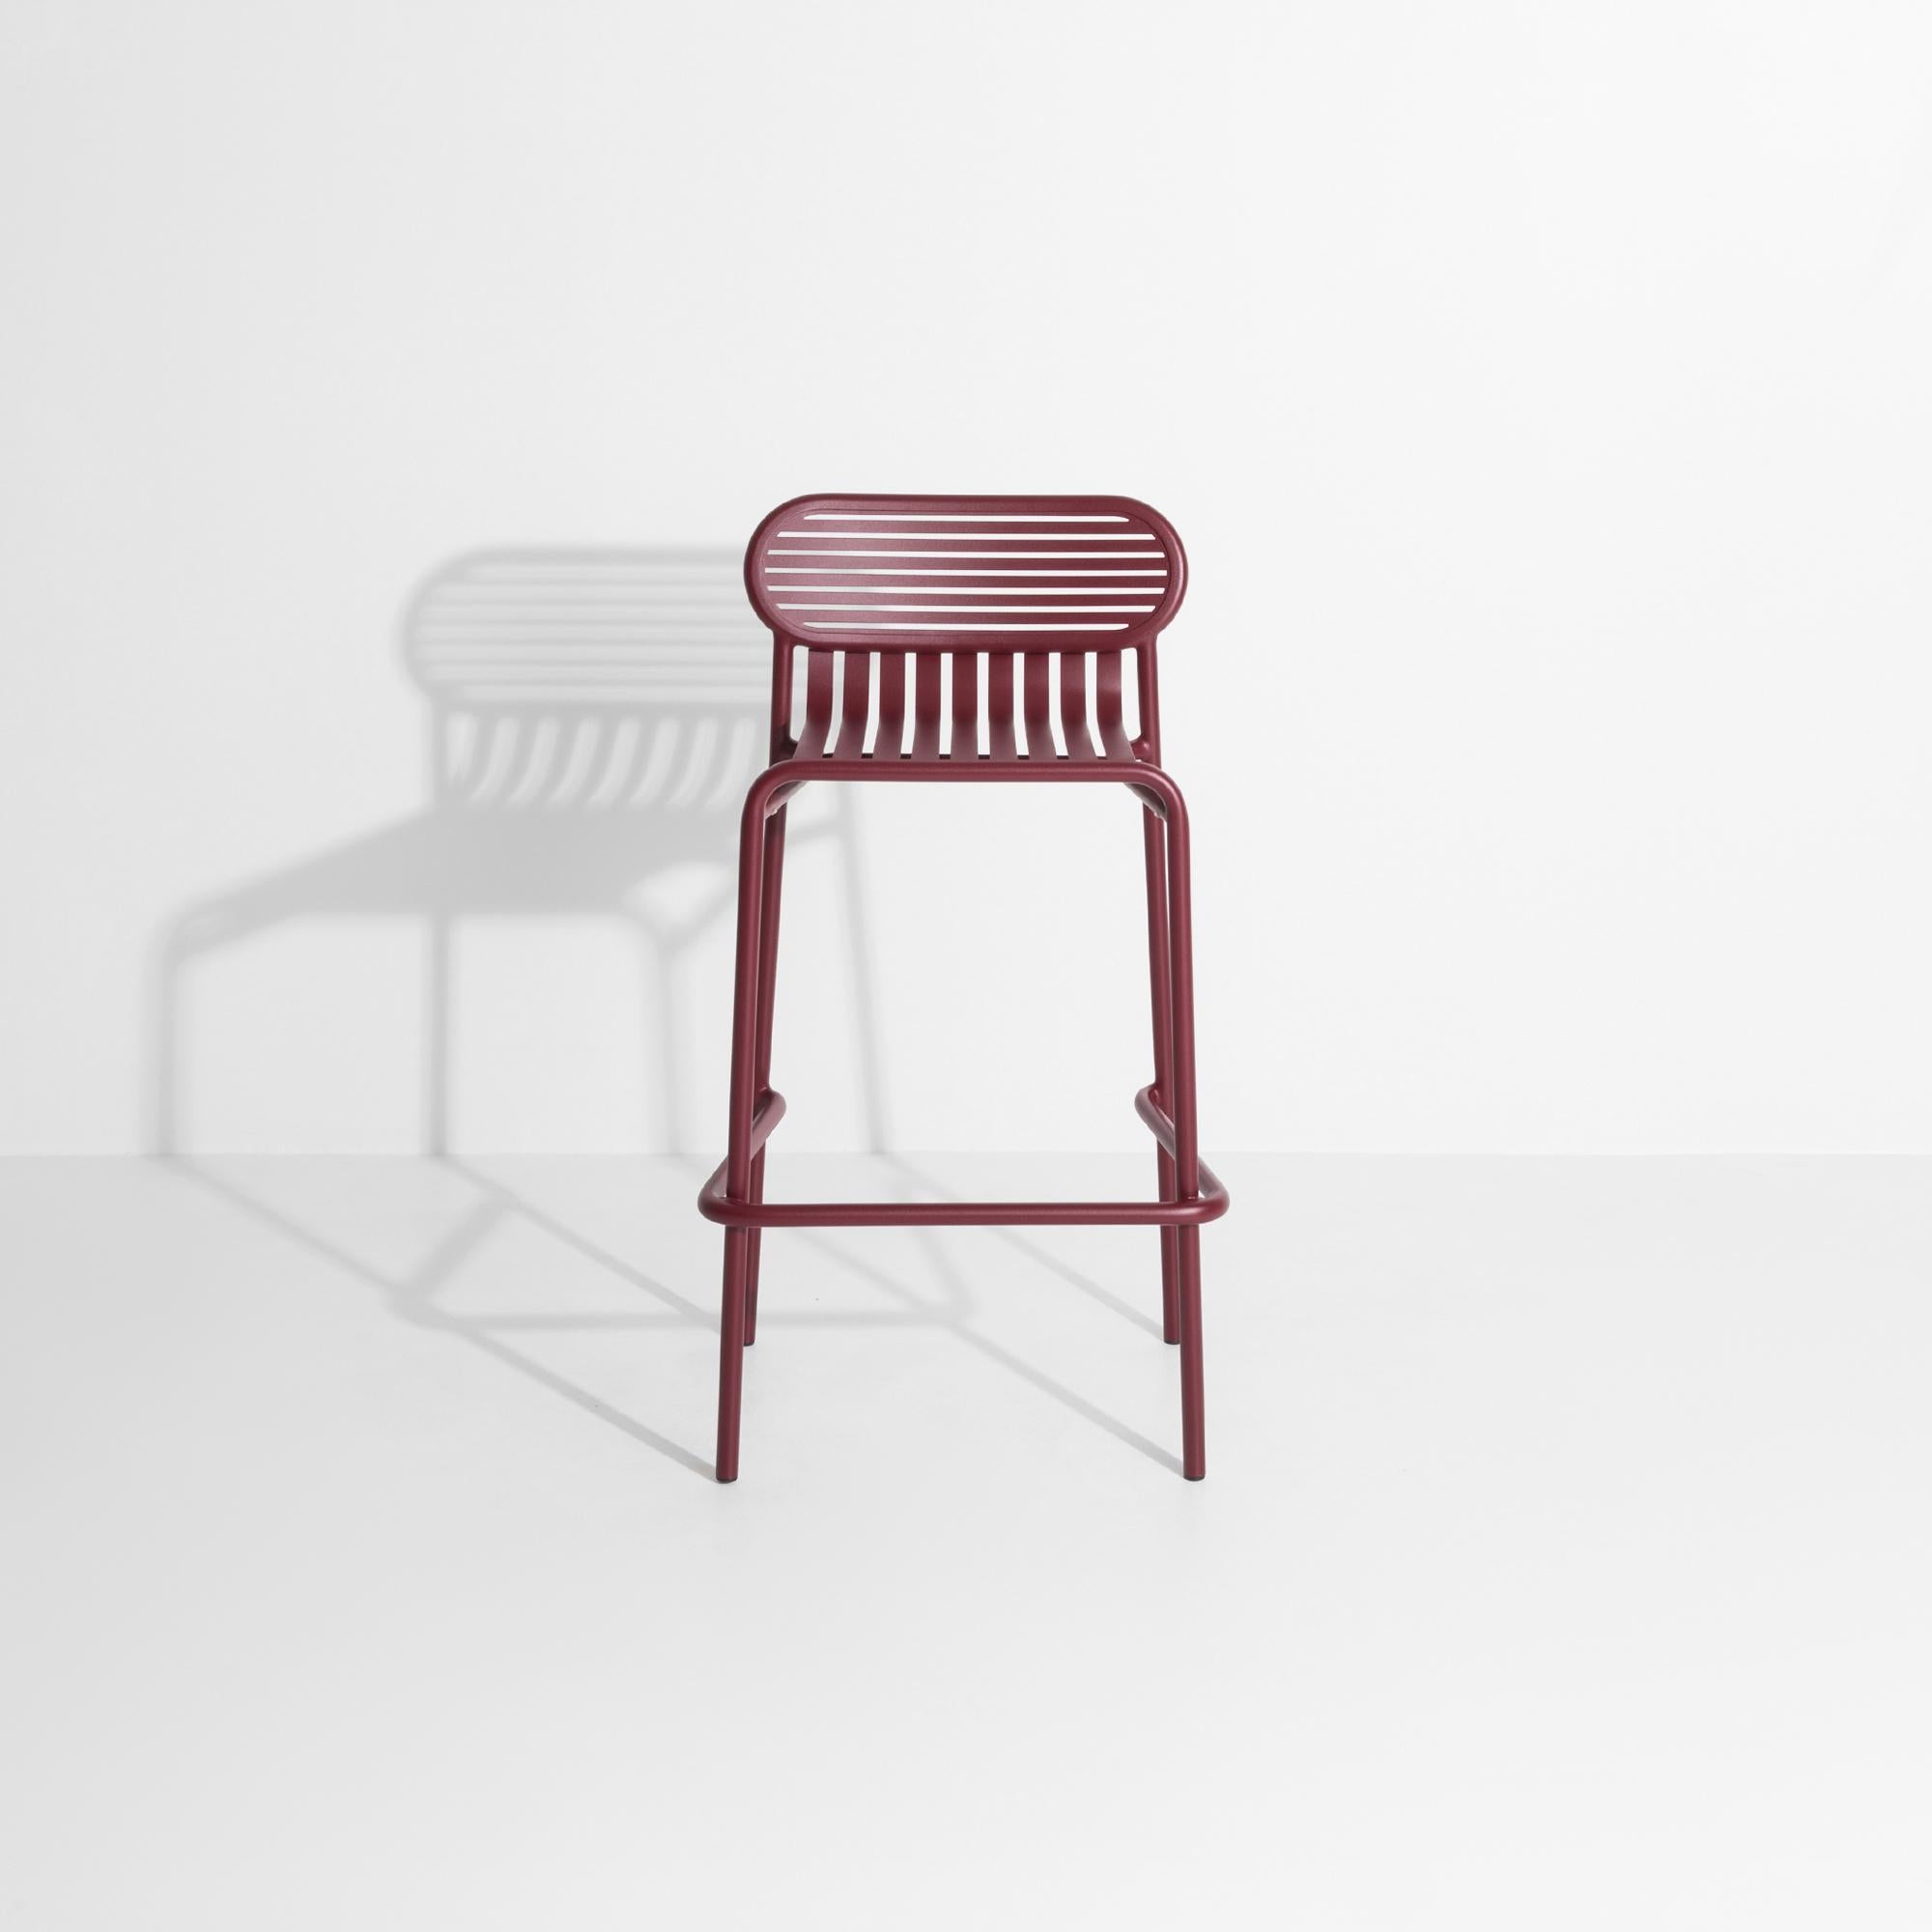 Petite Friture Week-End Bar Stool in Burgundy Aluminium by Studio BrichetZiegler In New Condition For Sale In Brooklyn, NY